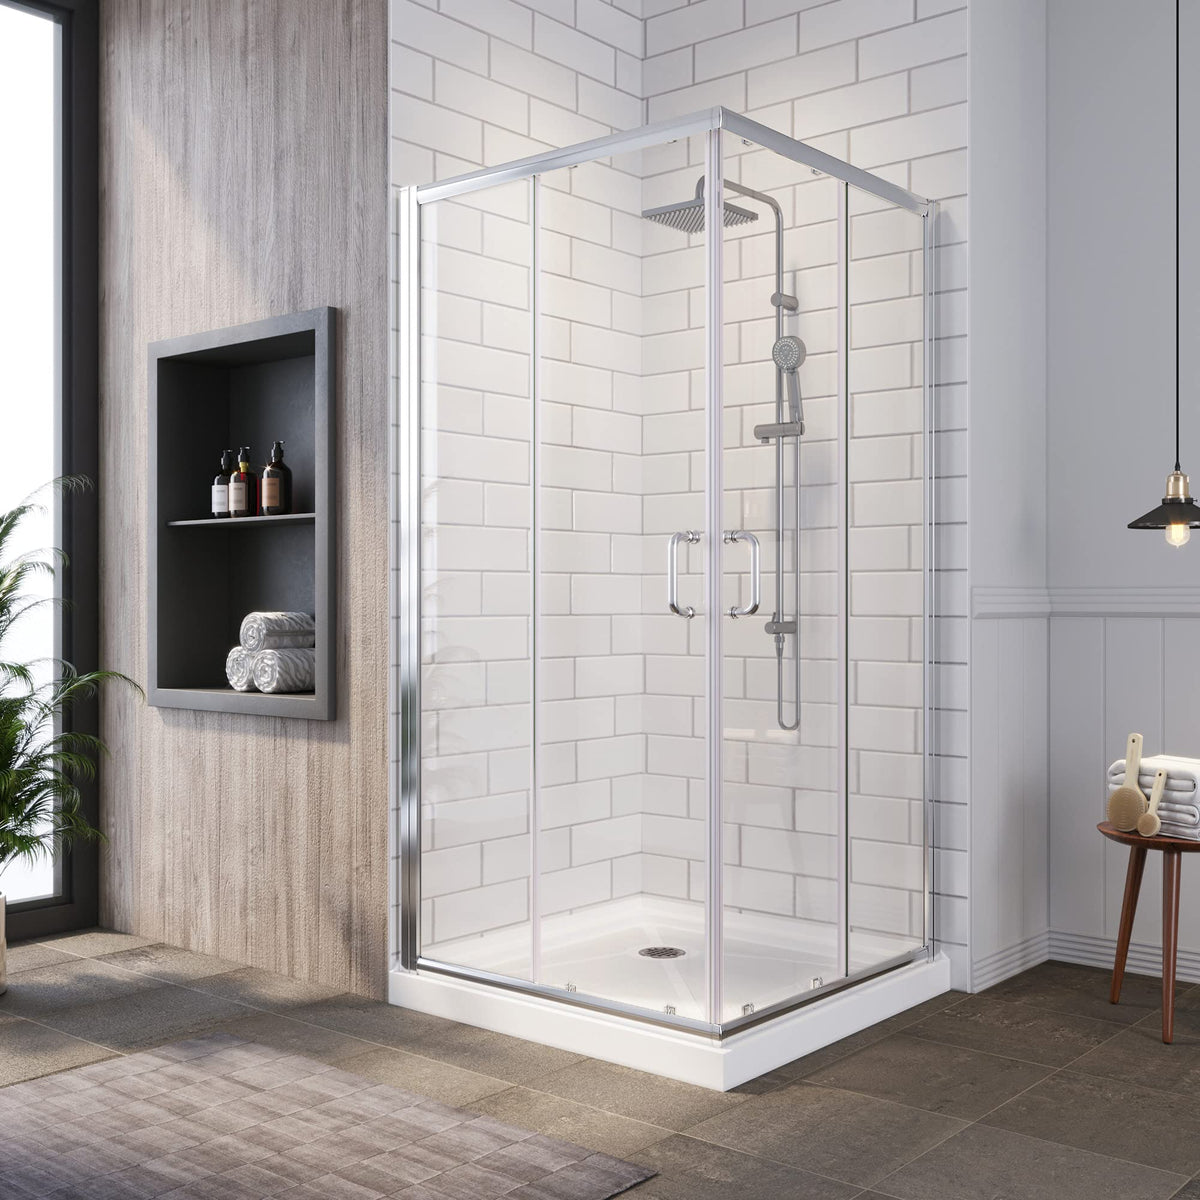 SUNNY SHOWER 34 in. W x 34 in. D x 72 in. H Brushed Nickel Corner Entry Enclosure With Sliding Doors And White Square Base